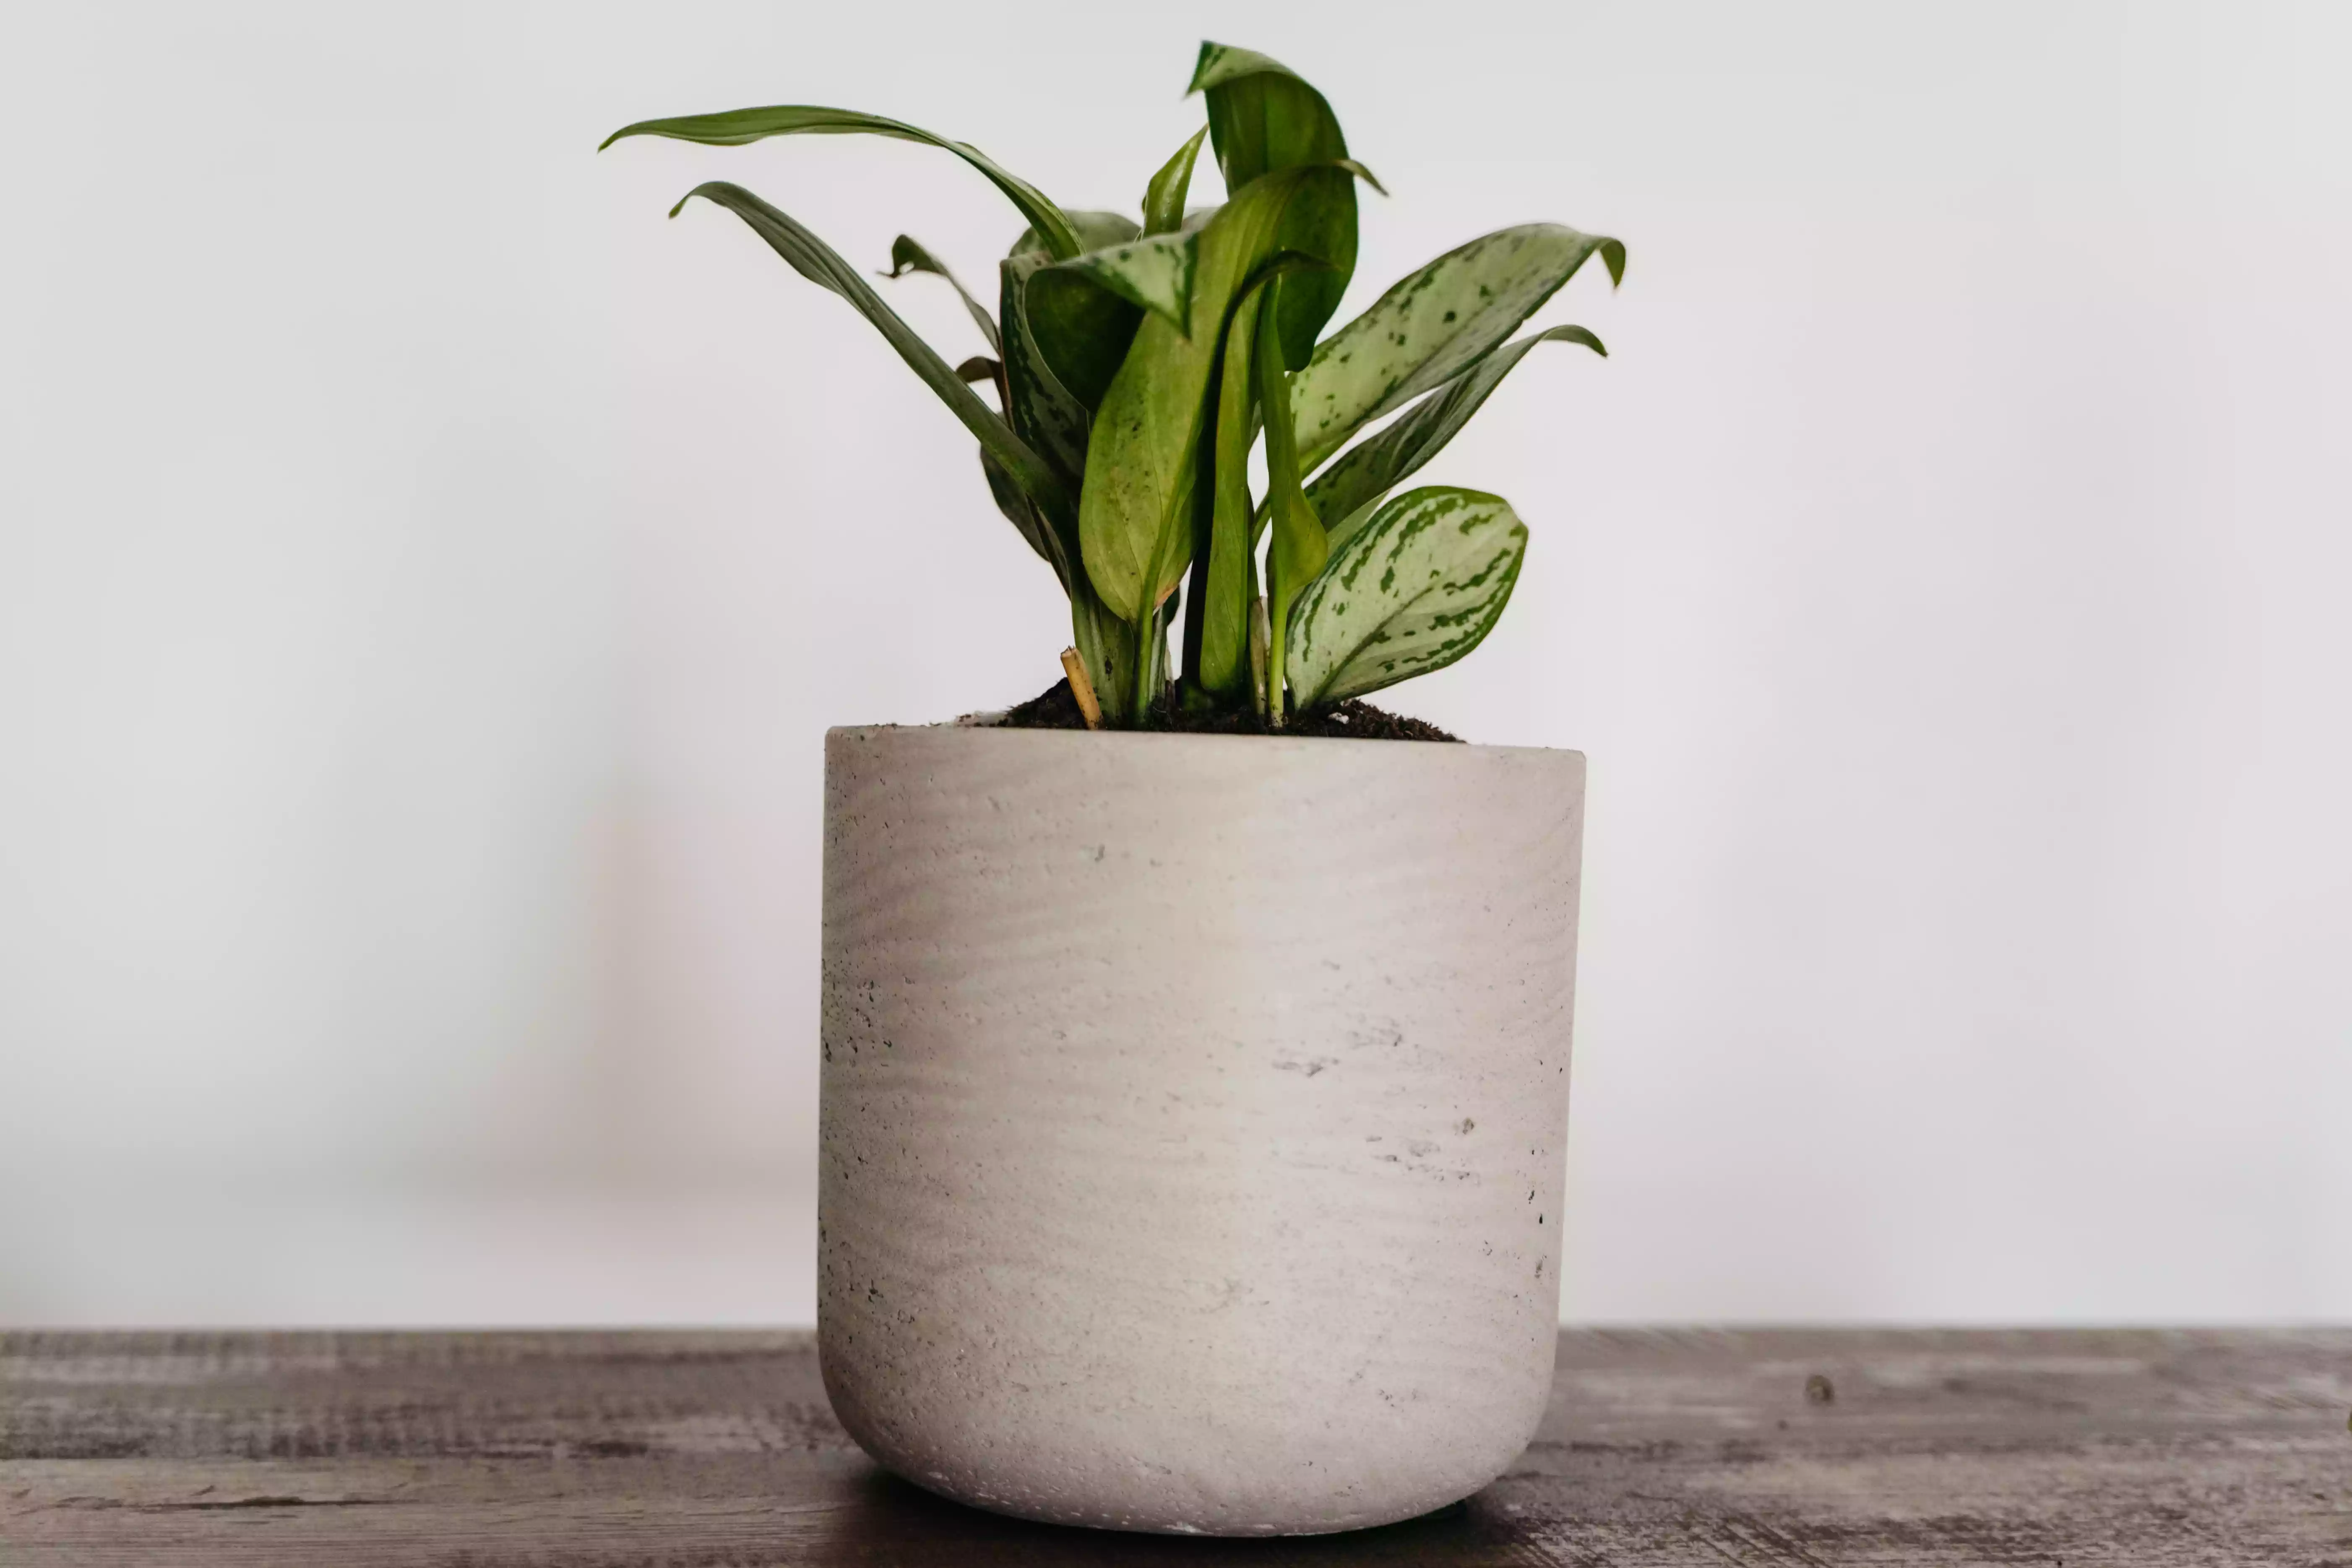 chinese evergreen plant in gray pot against neutral background